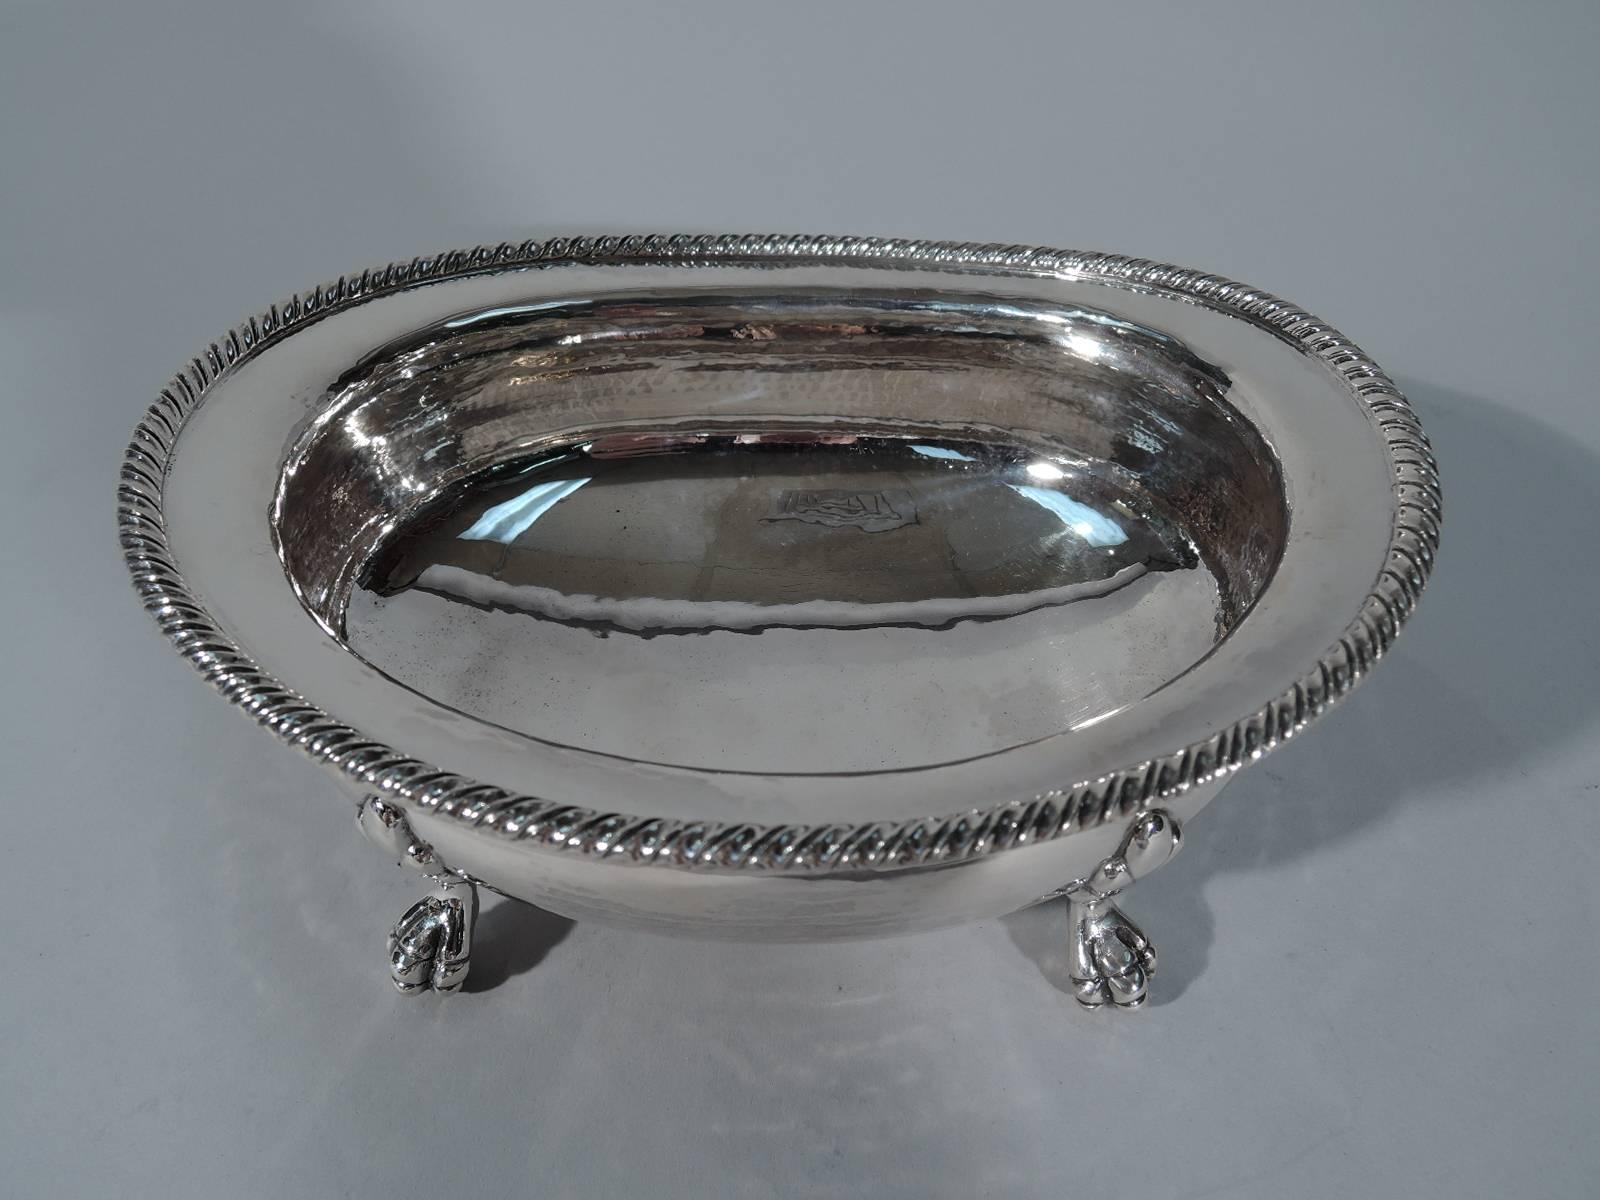 Hand-hammered sterling silver bowl. Made by Buccellati in Italy. Ovoid and bellied with gadrooned rim. Rests on four claw supports with stylized leaf mounts. Hallmarked. Very good condition. Dimensions: H 2 7/8 x W 6 1/2 x D 5 1/4 in. Weight: 11